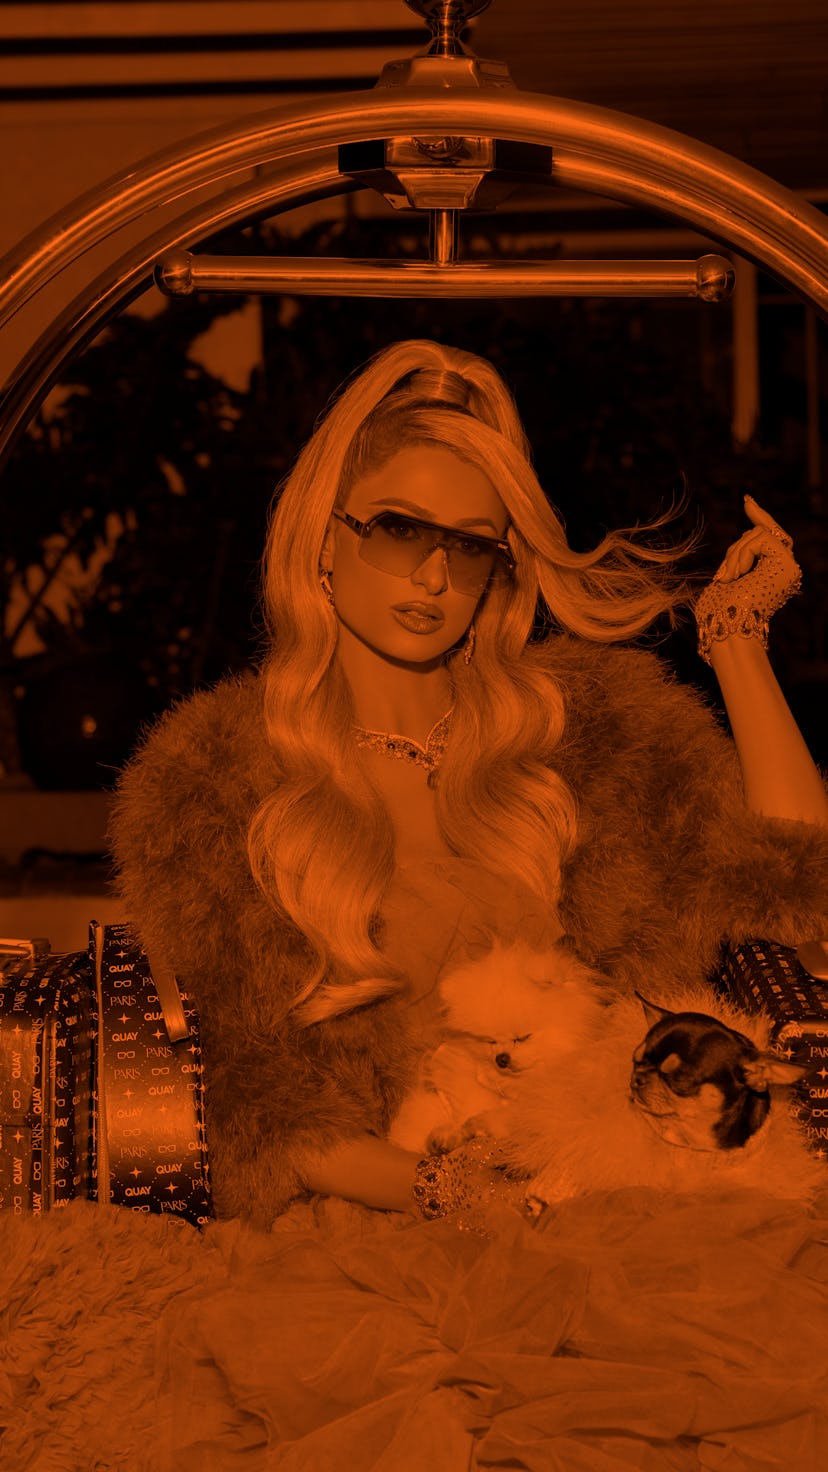 Paris Hilton wears Y2K-inspired sunglasses from her collaboration with Quay.